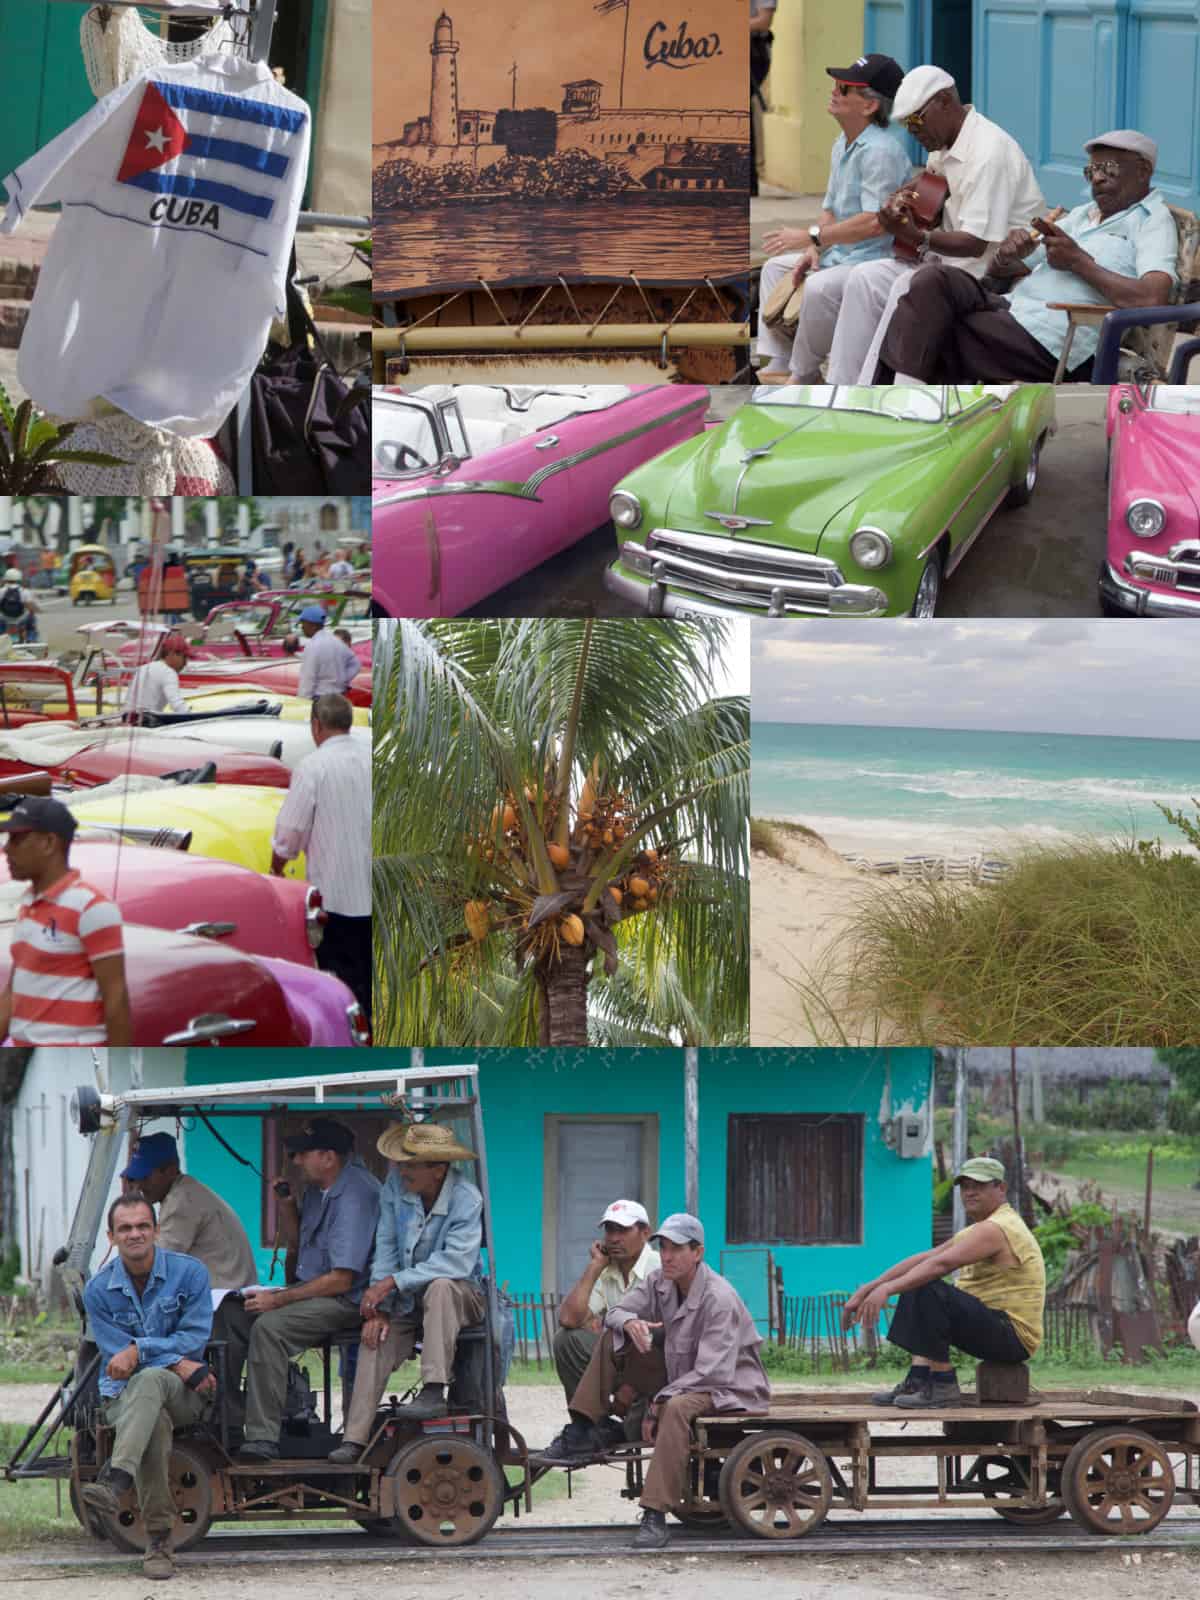 A travel photo collage of Cuba with cars, a palm tree, the beach and people with cars.